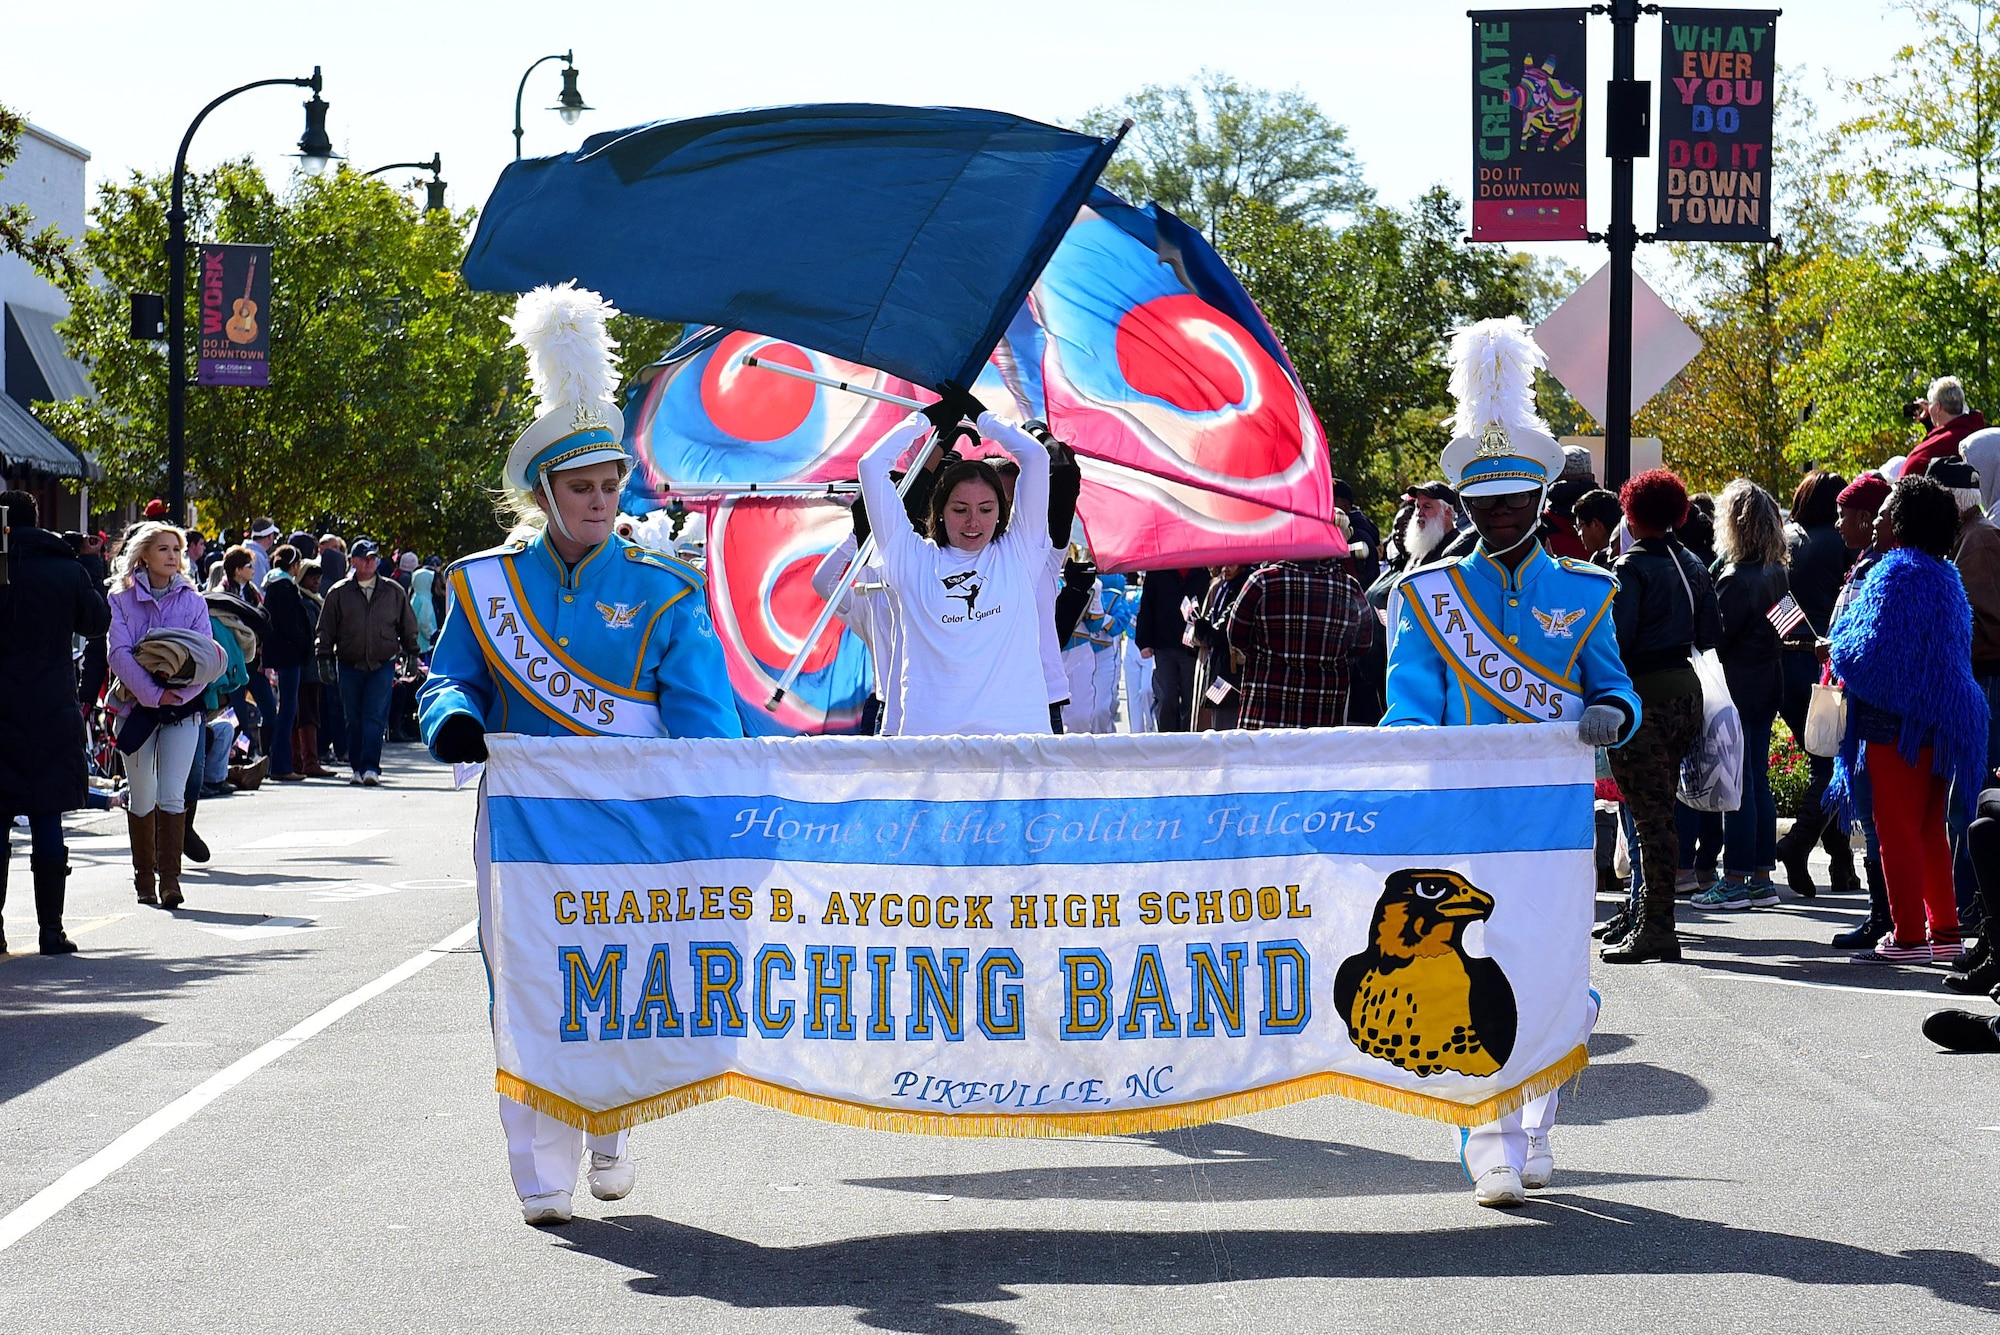 Members of the Charles B. Aycock High School Marching Band perform during the Wayne County Veterans Day Parade, Nov. 11, 2017, in Goldsboro, North Carolina. The parade was sponsored by the Wayne County Veterans and Patriots Coalition, who provide services for approximately 23,000 veterans living within Wayne County. (U.S. Air Force photo by Airman 1st Class Kenneth Boyton)